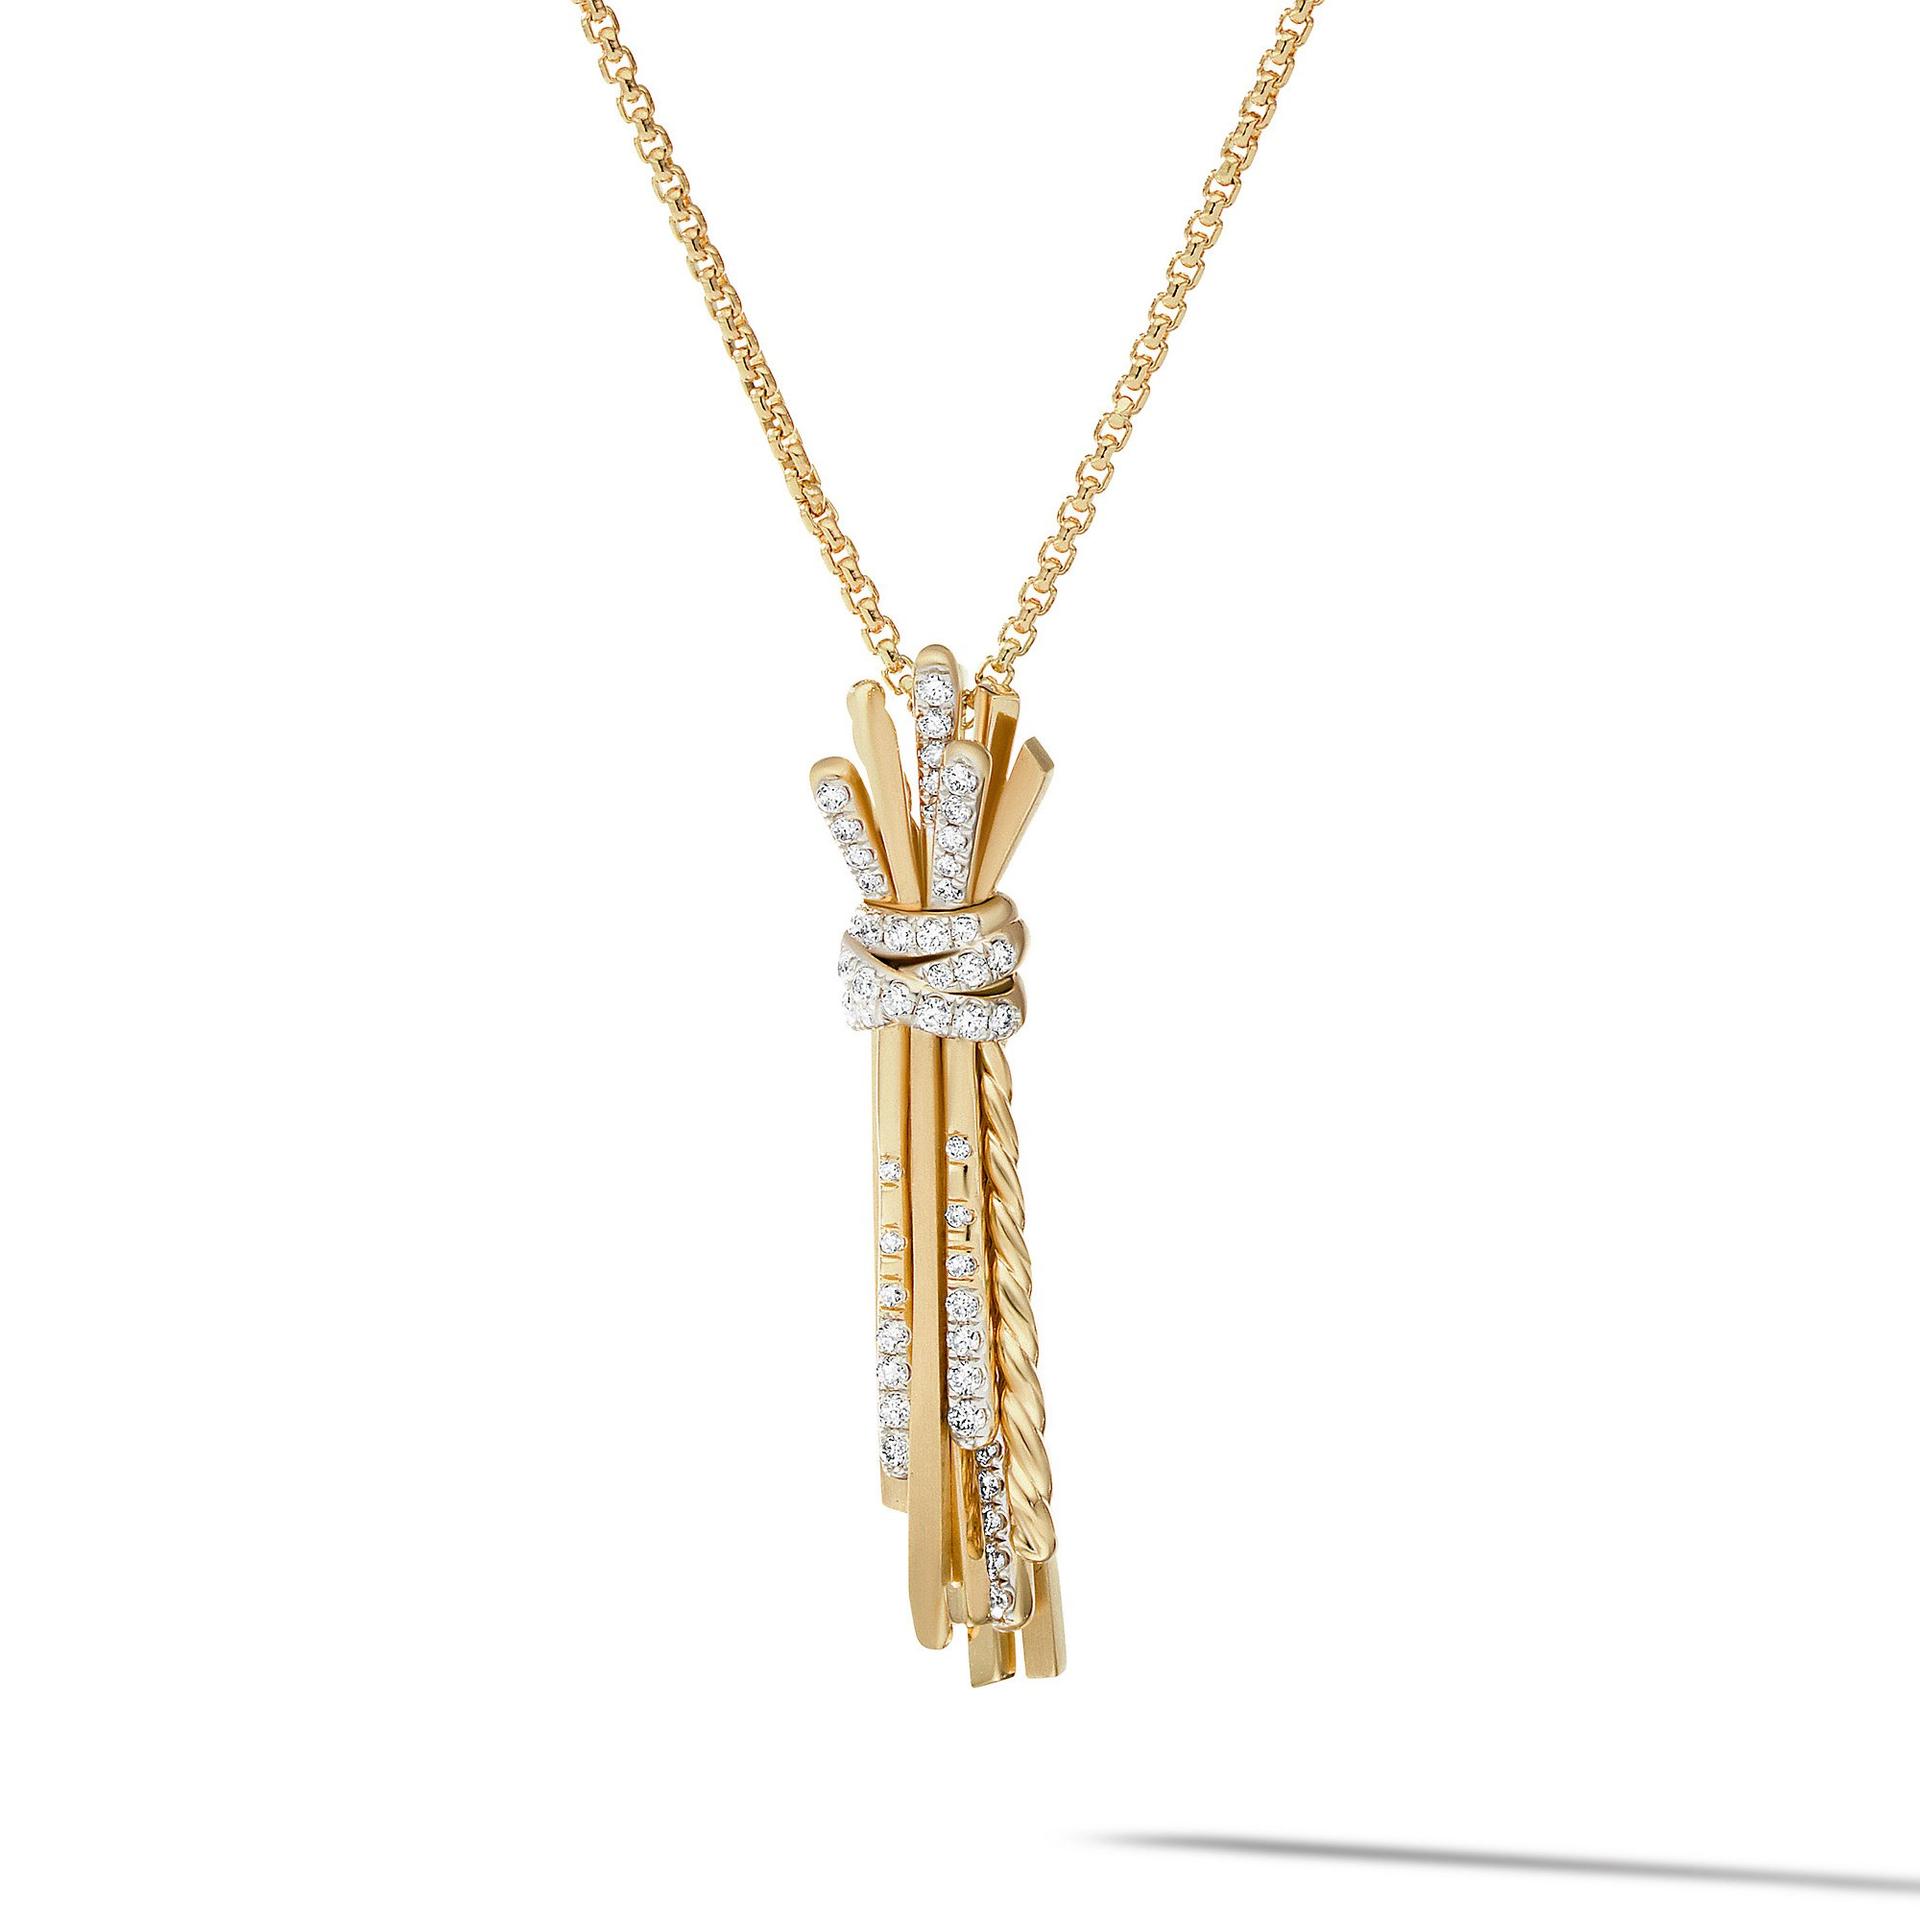 David Yurman Angelika Flair Pendant Necklace in 18K Yellow Gold with Pave Diamonds 1